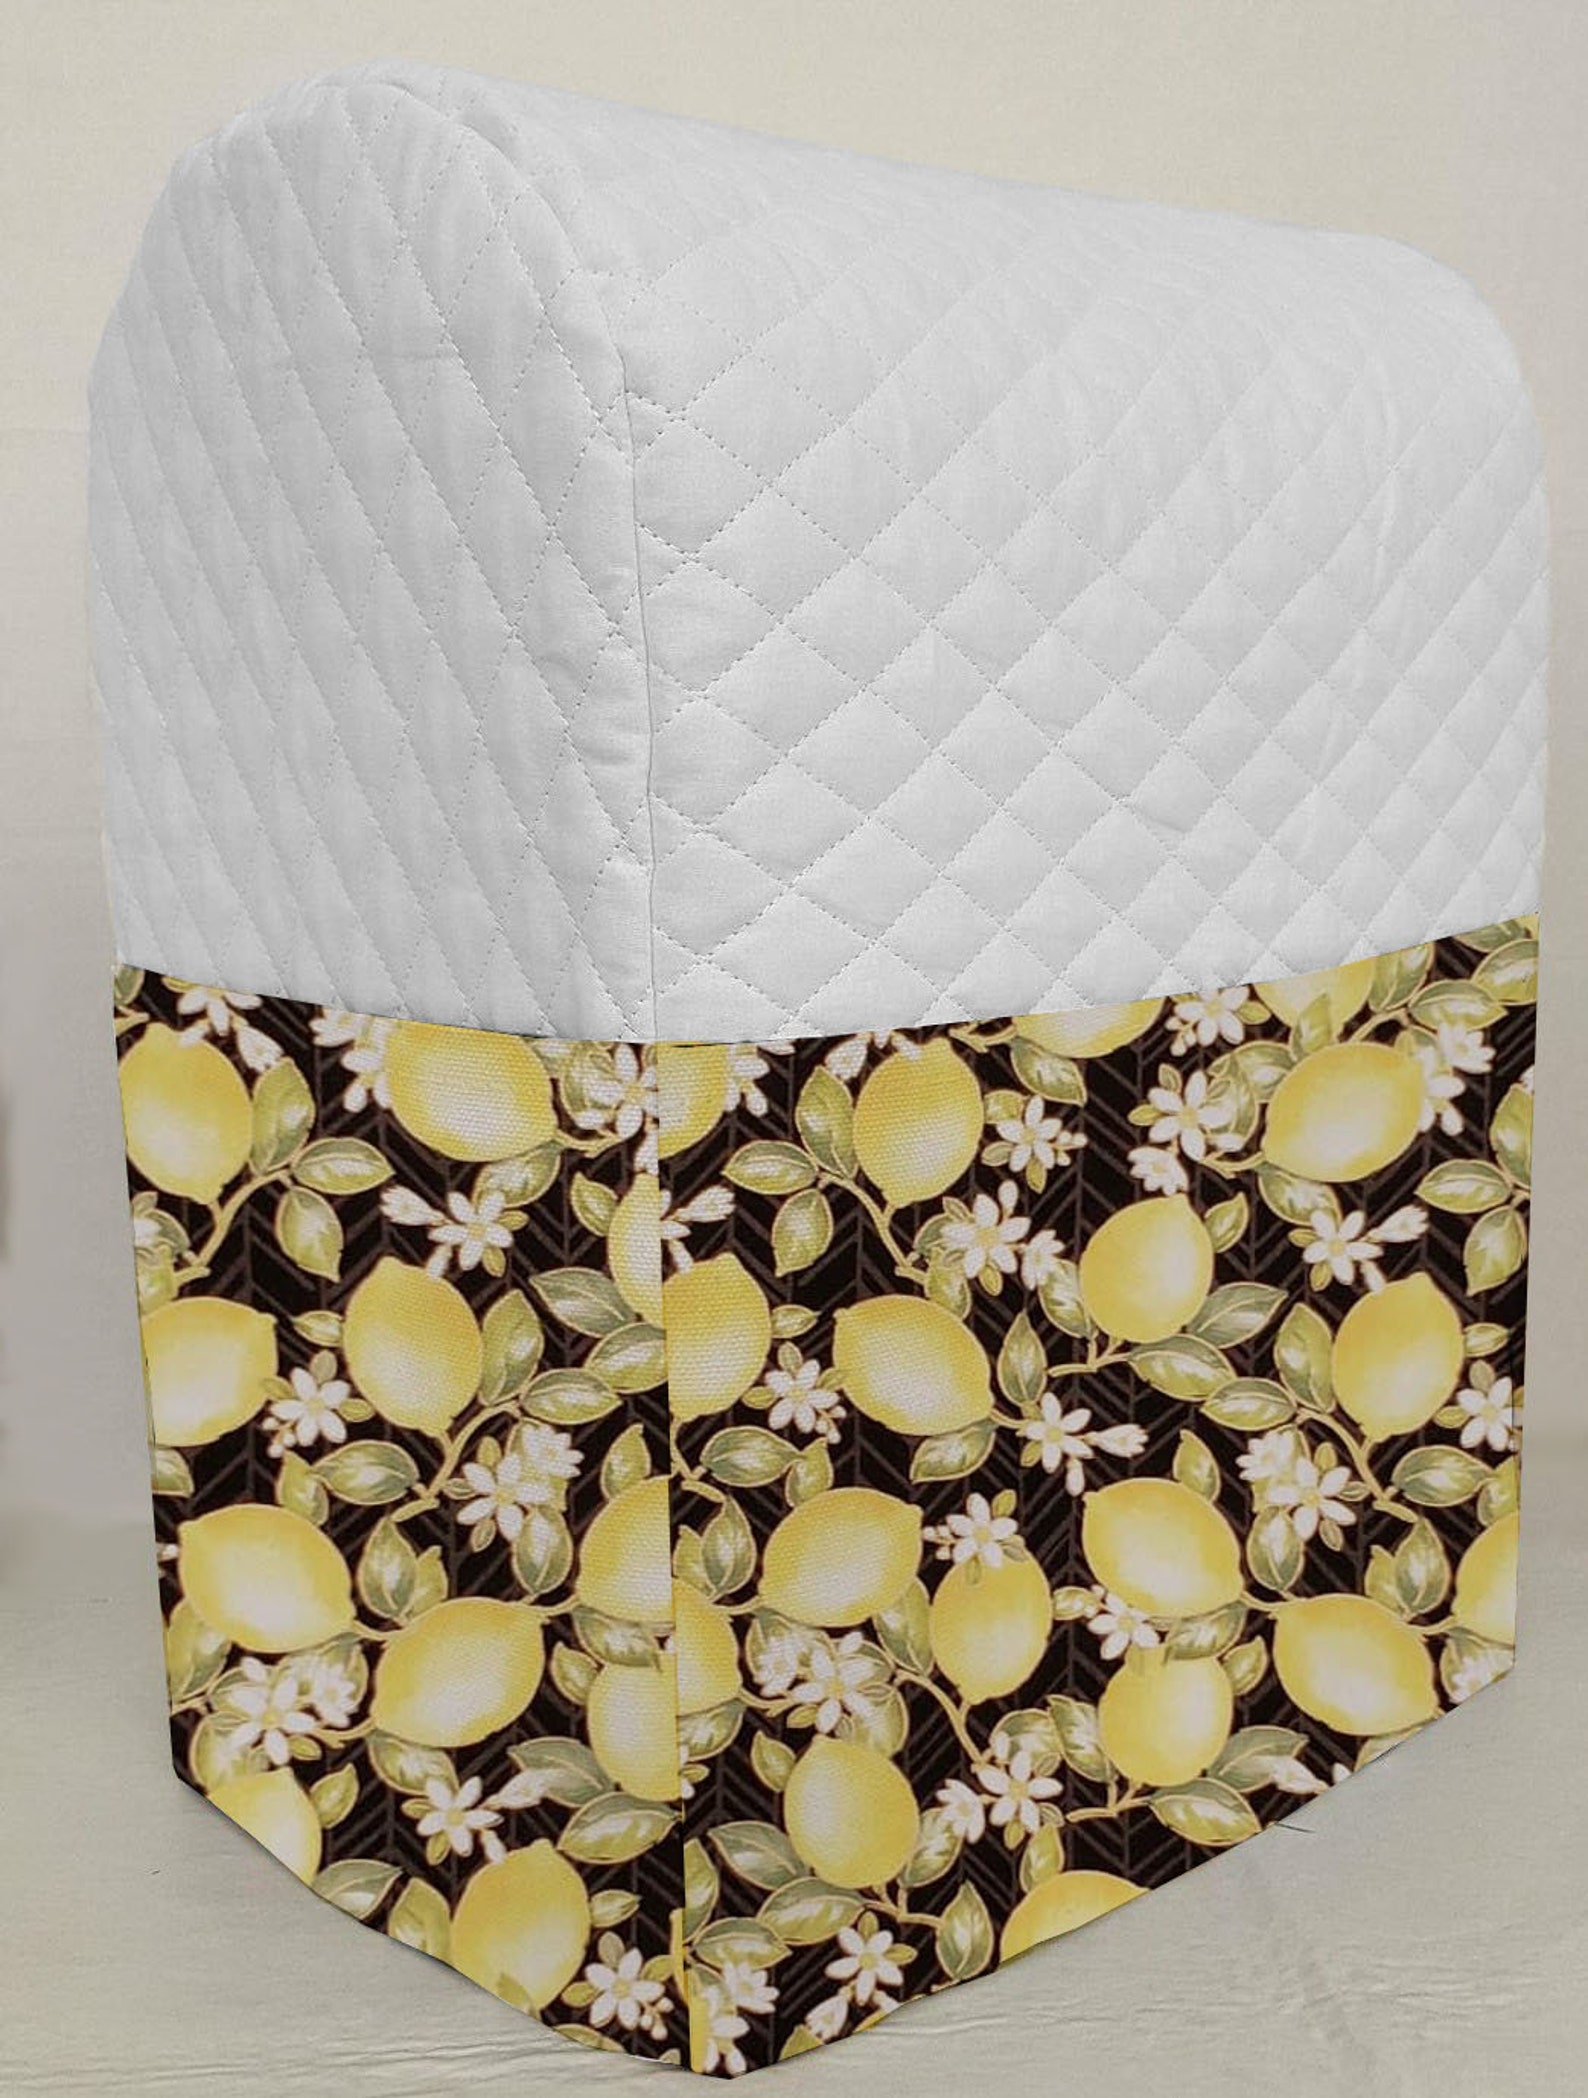 Quilted Lemon Blossoms Cover Compatible with Hamilton Beach 4 Quart 7 Speed Tilt Head Stand Mixer by Penny's Needful Things (White) - image 1 of 3